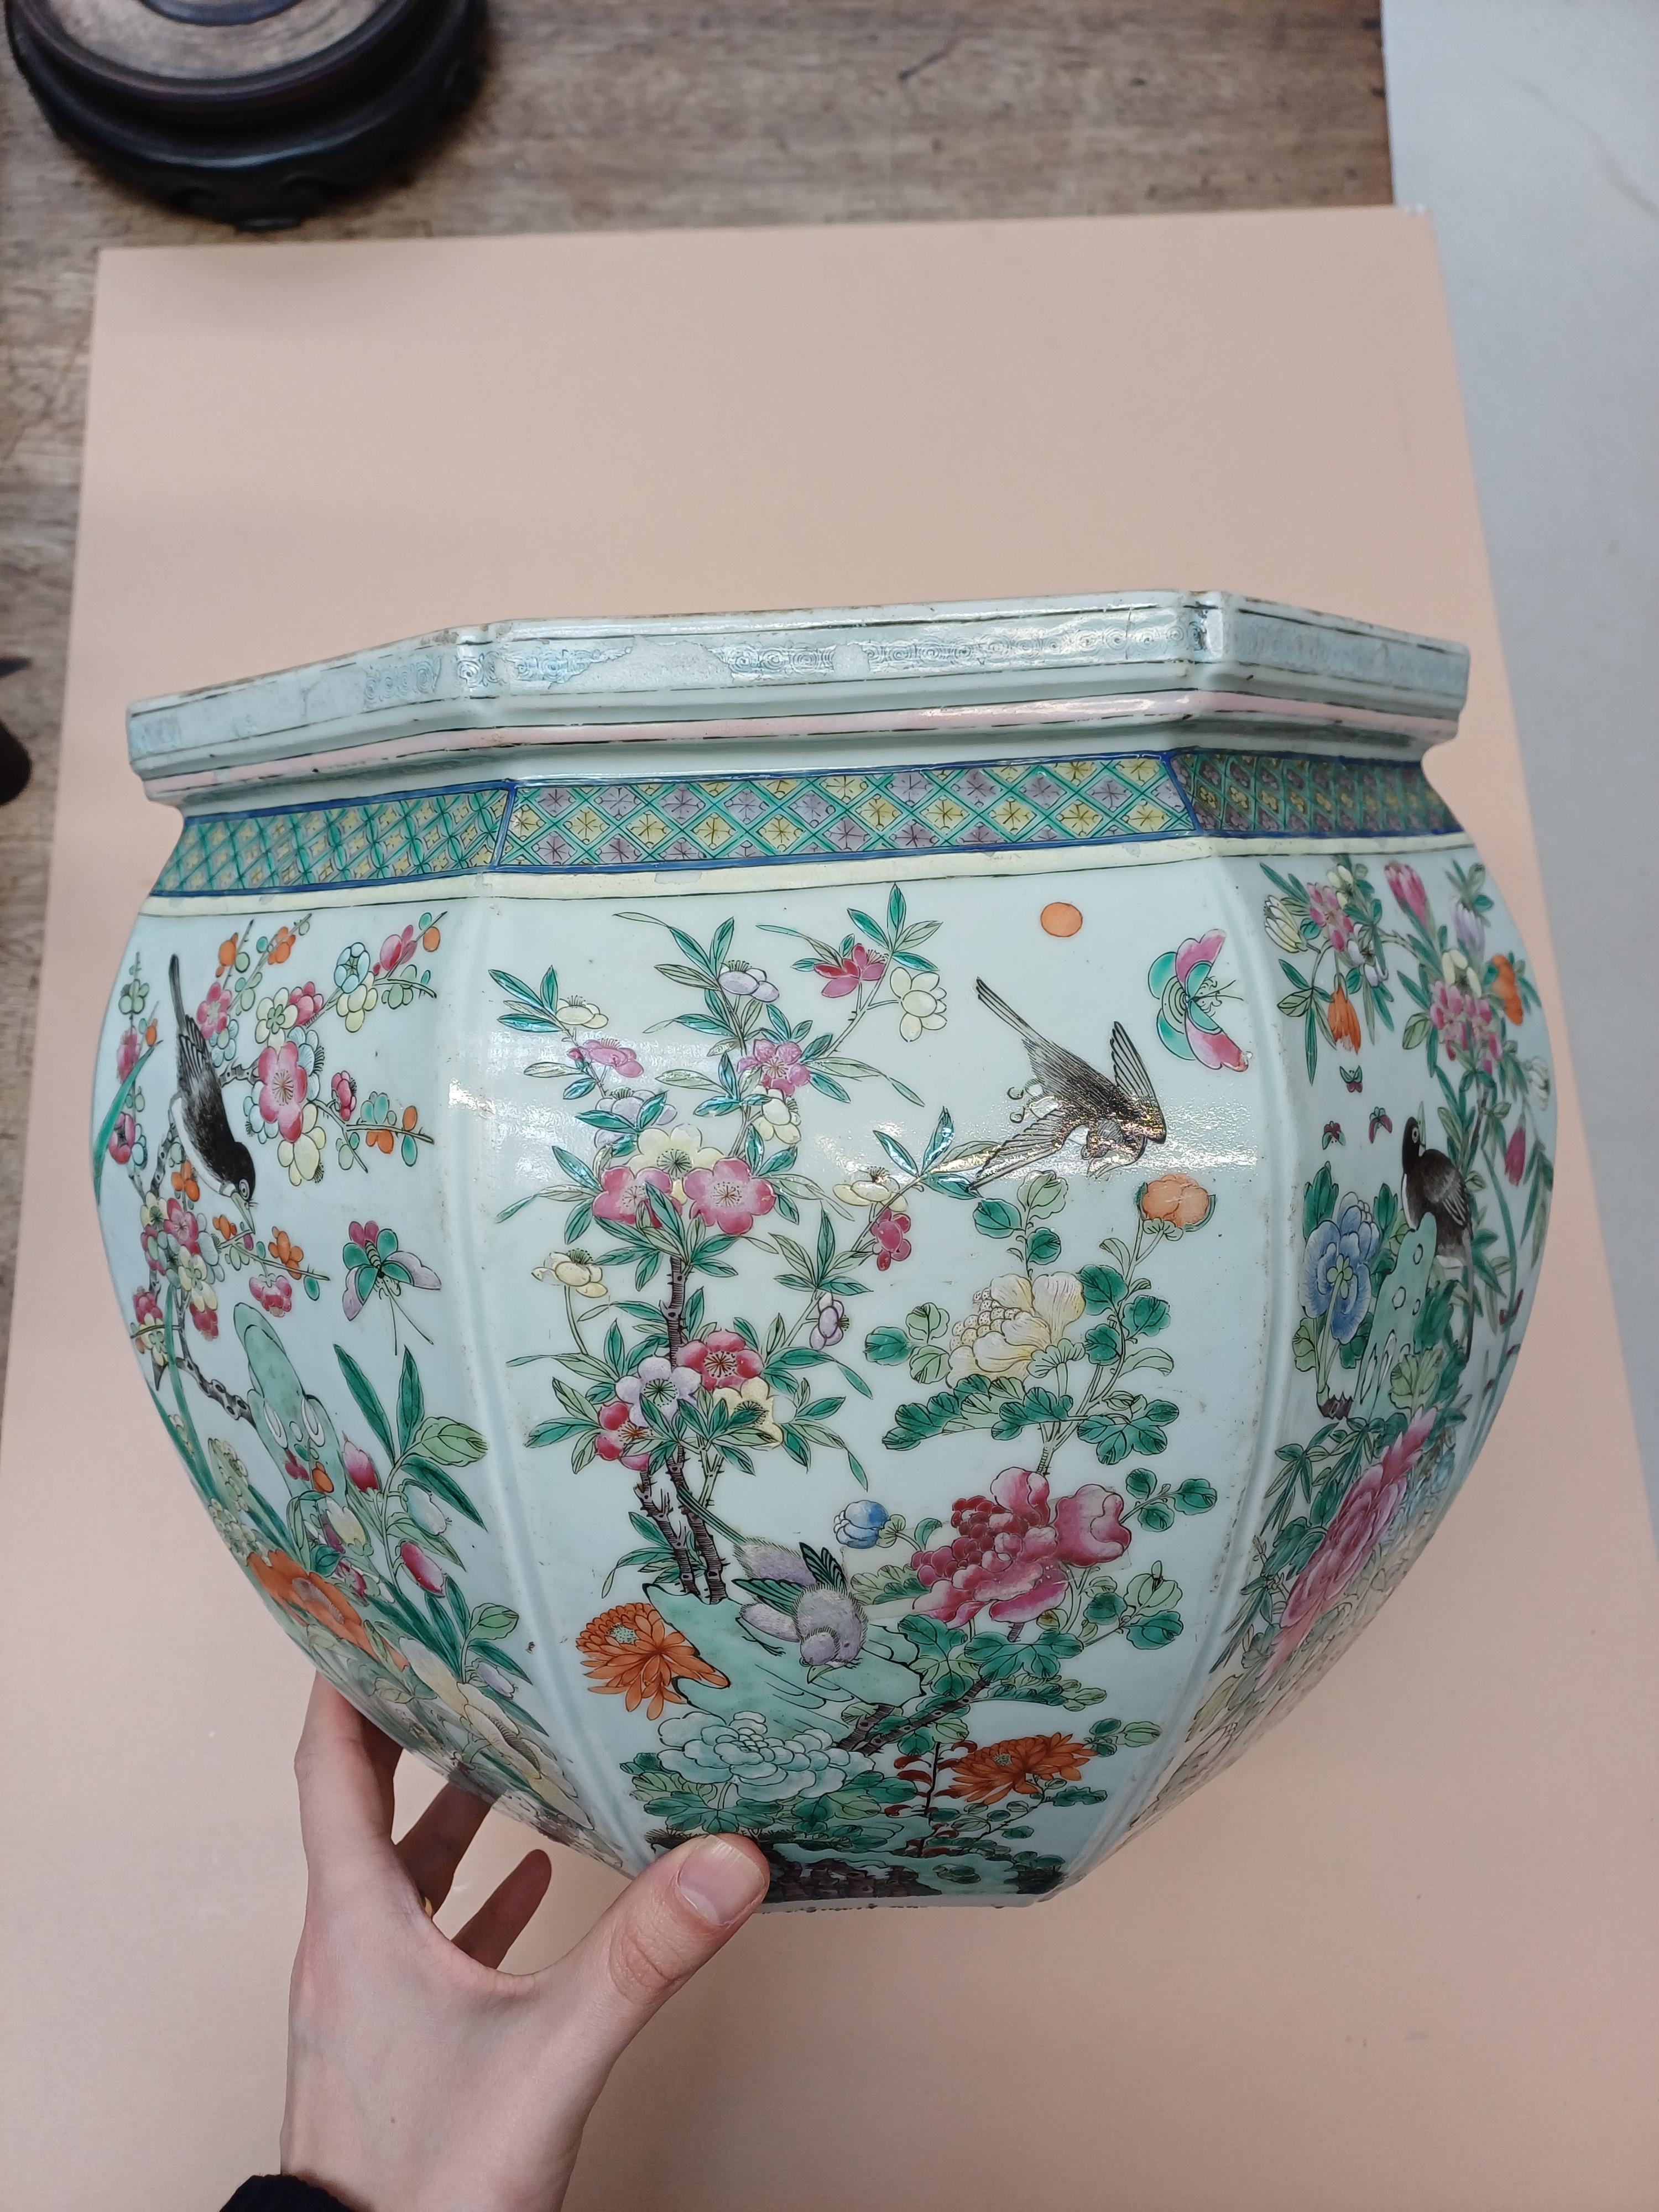 A CHINESE FAMILLE-VERTE ‘BIRDS AND BLOSSOMS’ OCTAGONAL JARDINIERE 十九世紀 五彩花鳥圖紋盆 - Image 3 of 12